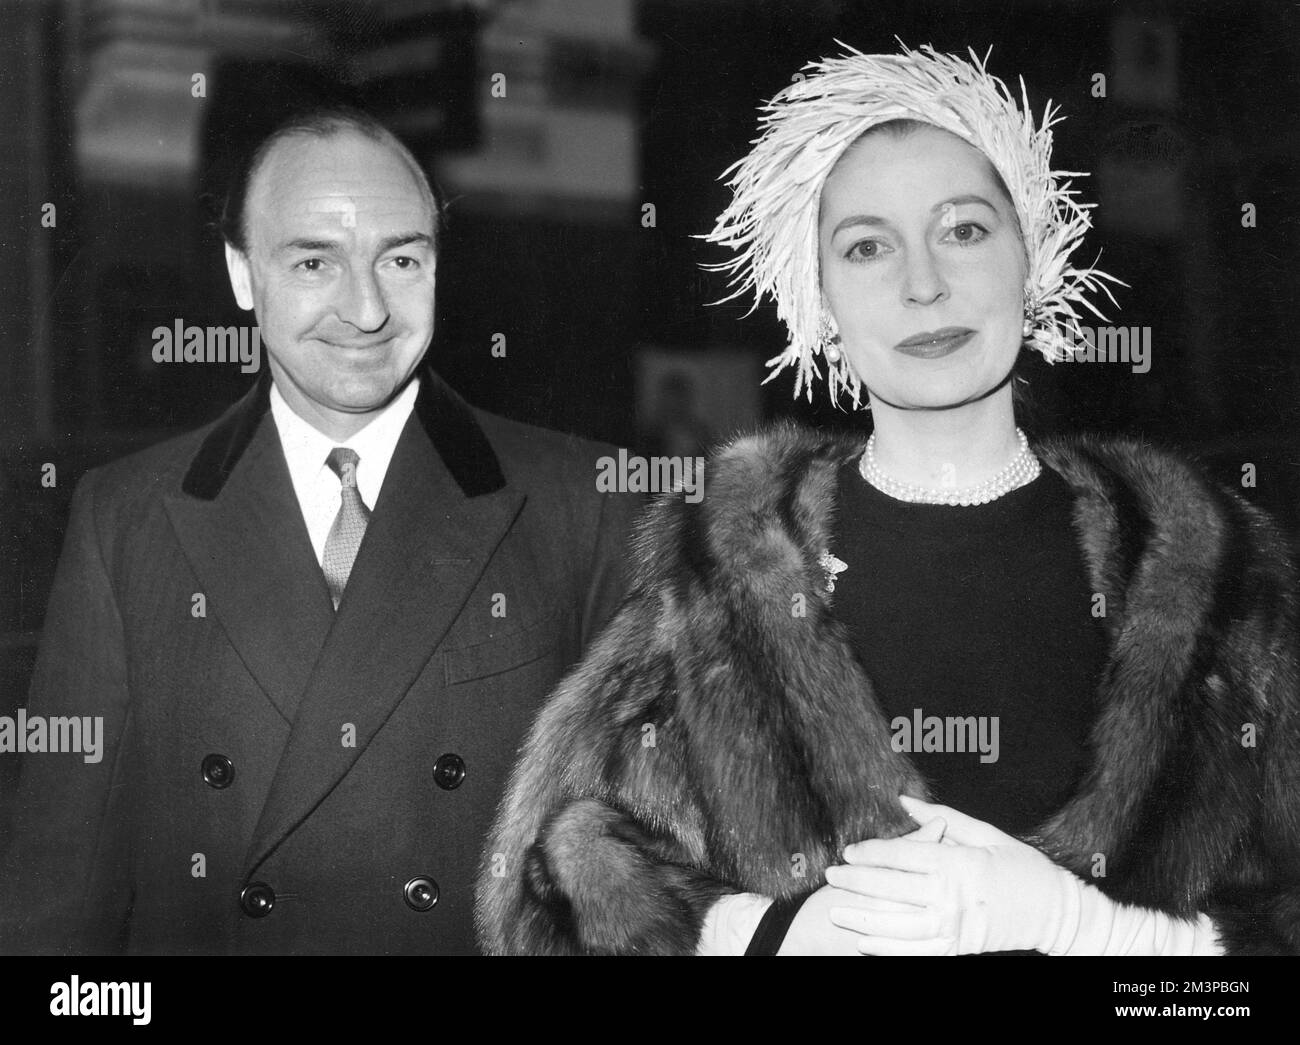 John Dennis Profumo (1915-2006), British conservative politician and Secretary of State for War in Harold Macmillan's government until his involvement with call girl Christine Keeler (and his subsequent denial of any impropriety) during the infamous Profumo Affair led to his resignation.  Pictured with his wife, actress Valerie Hobson (1917-1998).     Date: c.1960 Stock Photo